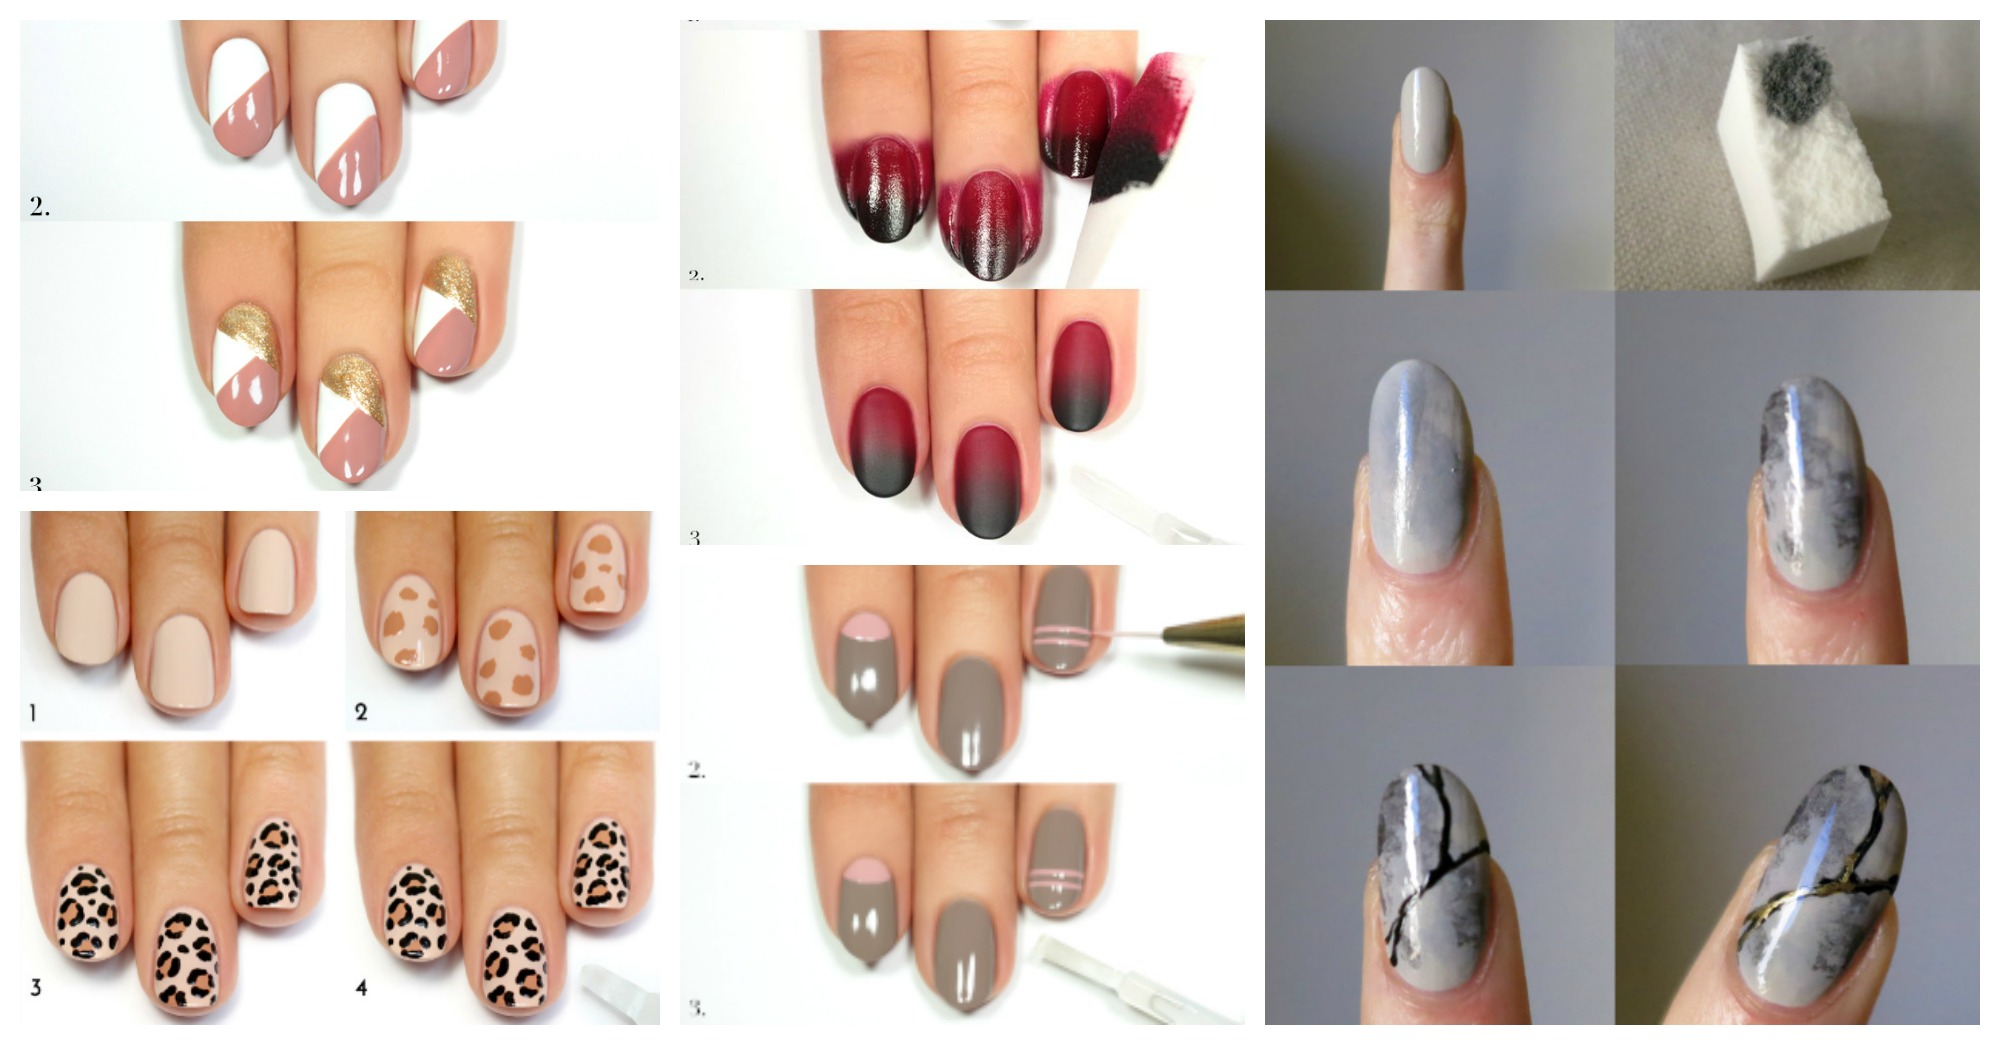 1. Step by Step Nail Design Tutorials - wide 11